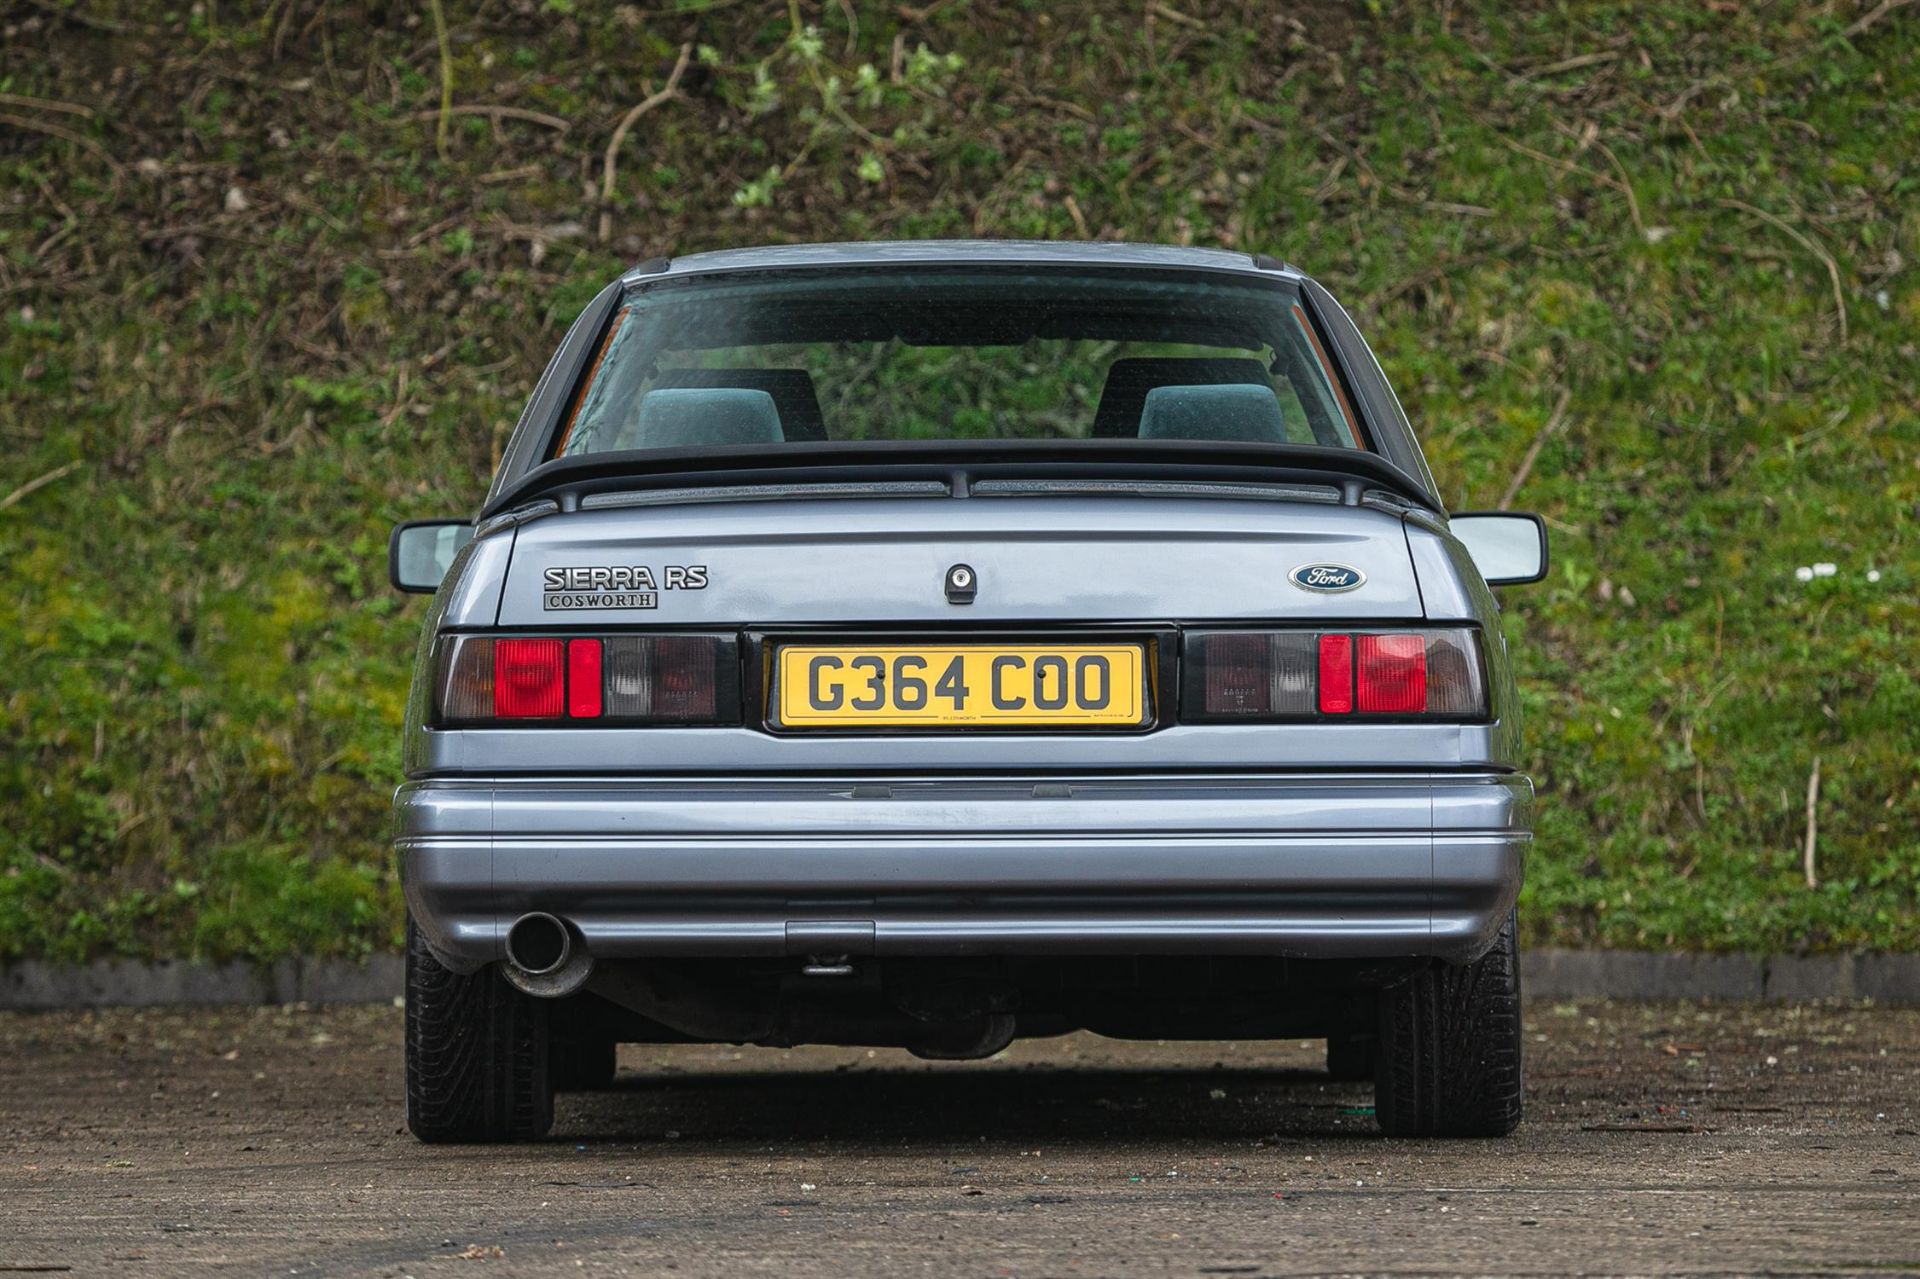 1990 Ford Sierra Sapphire RS Cosworth 4x4 - ex-Press Car - Image 7 of 10